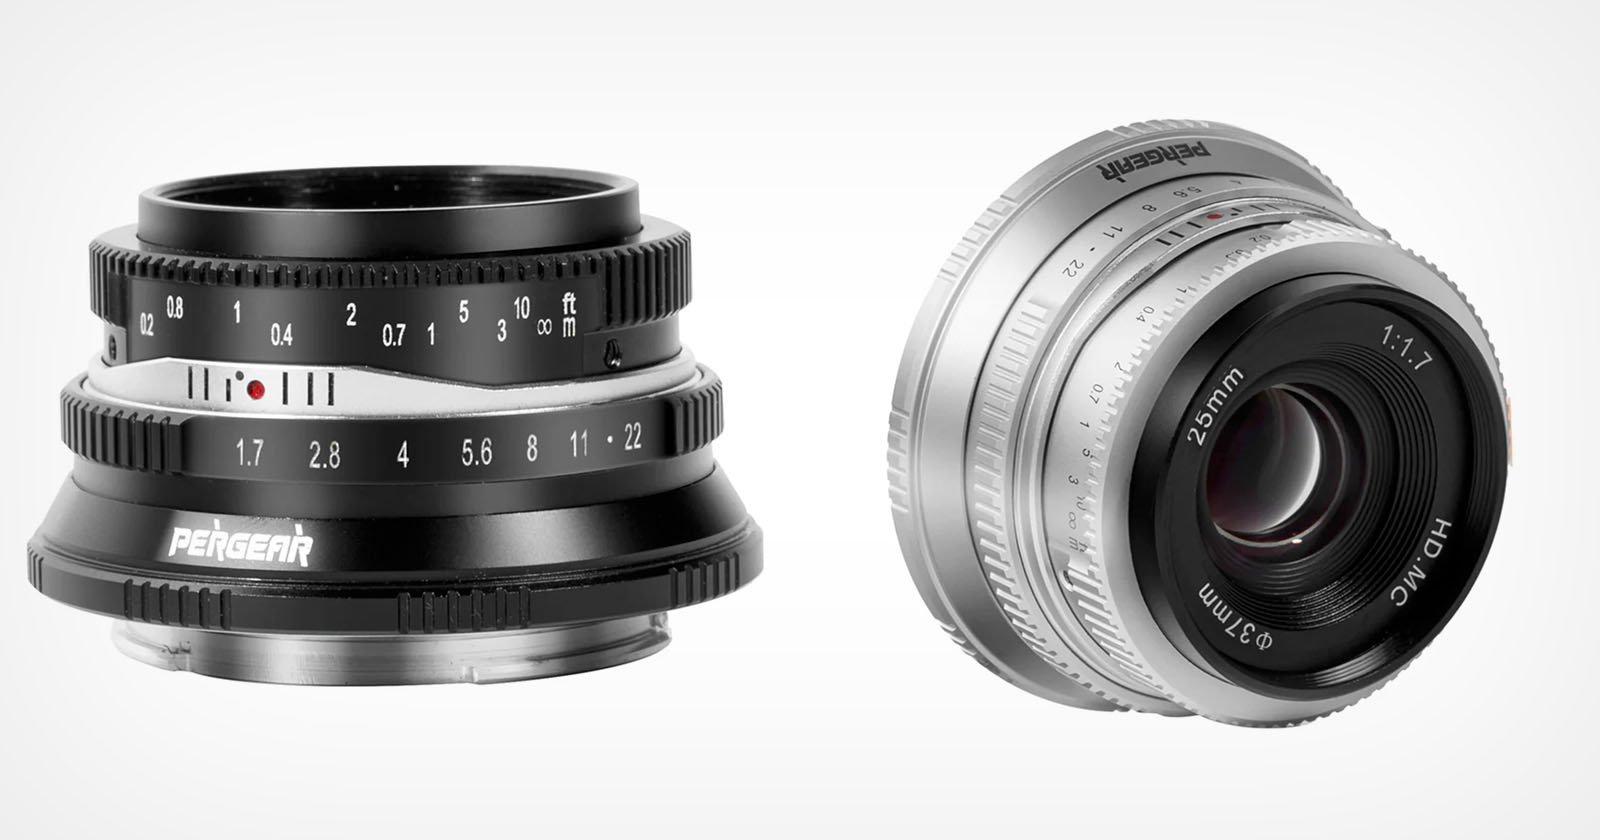  pergear 25mm aps-c lens available now 